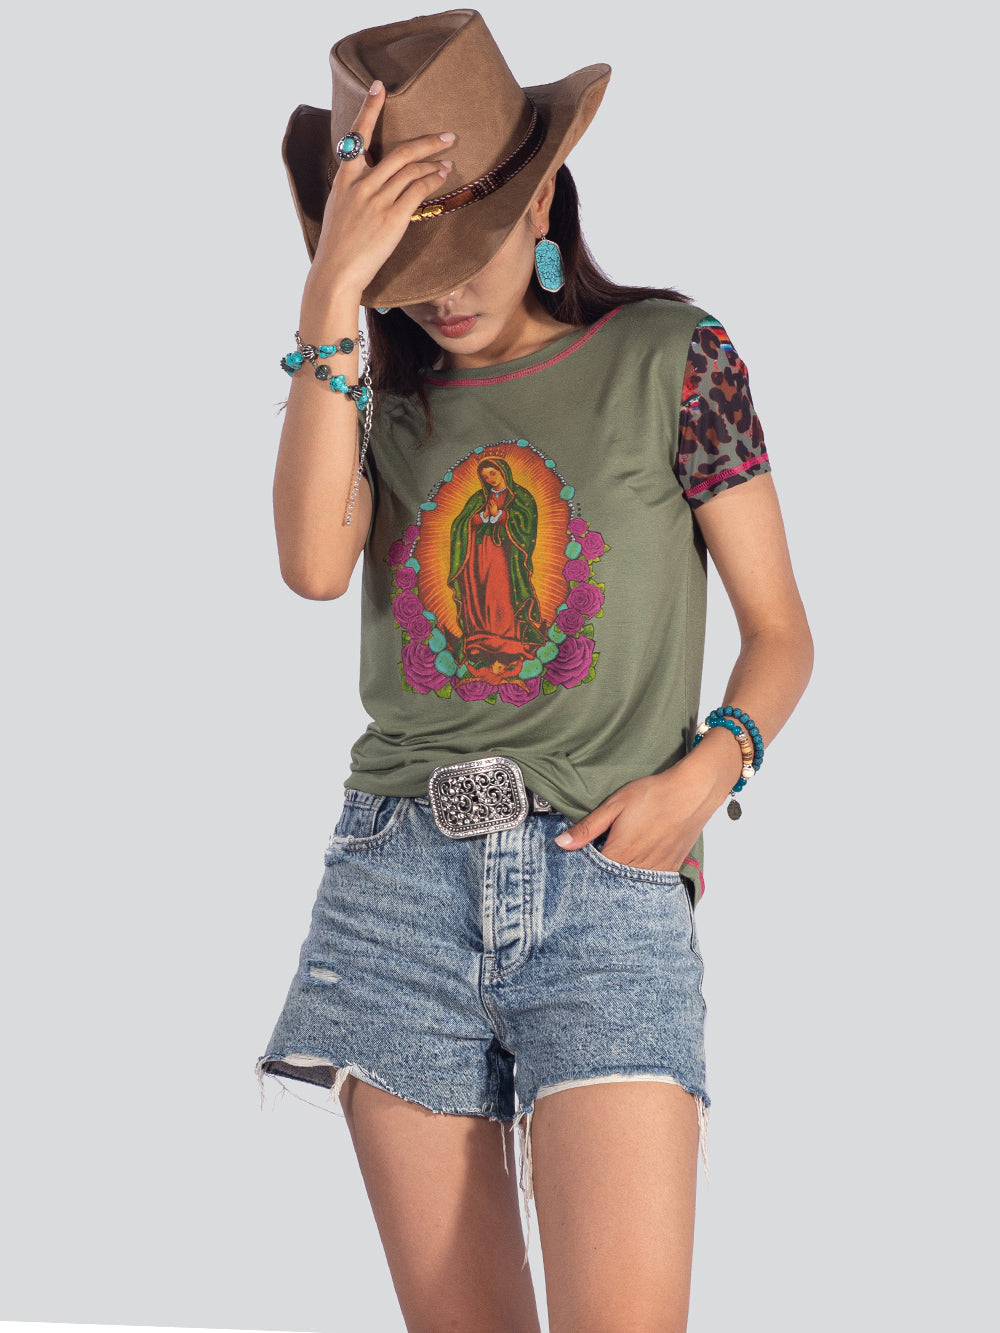 American Bling Our Lady of Guadalupe Women T-Shirt - Montana West World